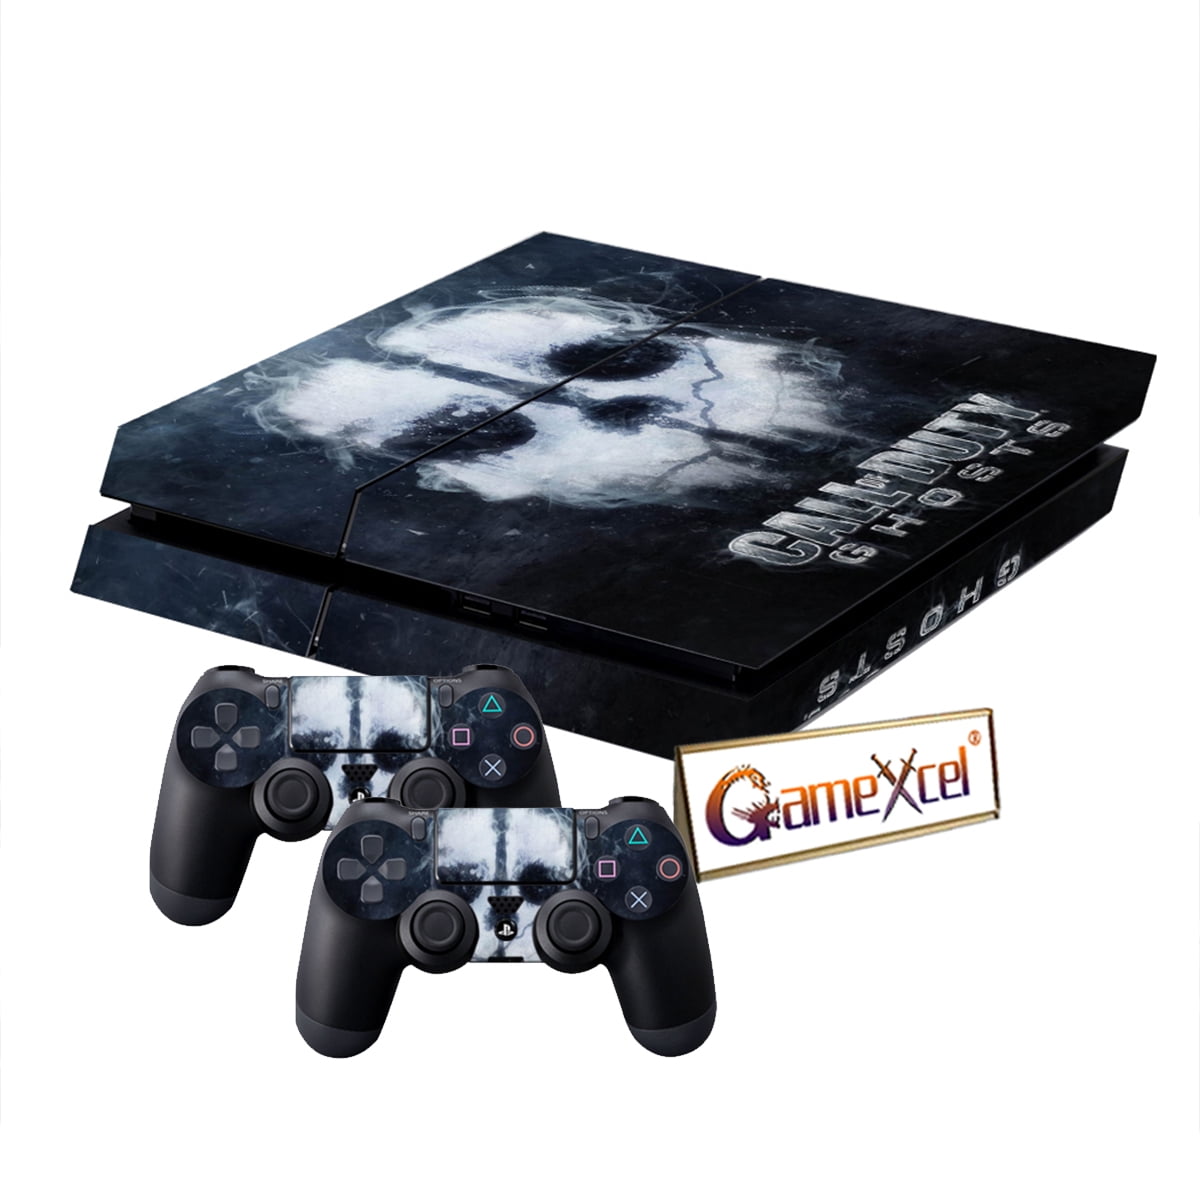 Sony, Video Games & Consoles, Call Of Duty Ghosts Ps4